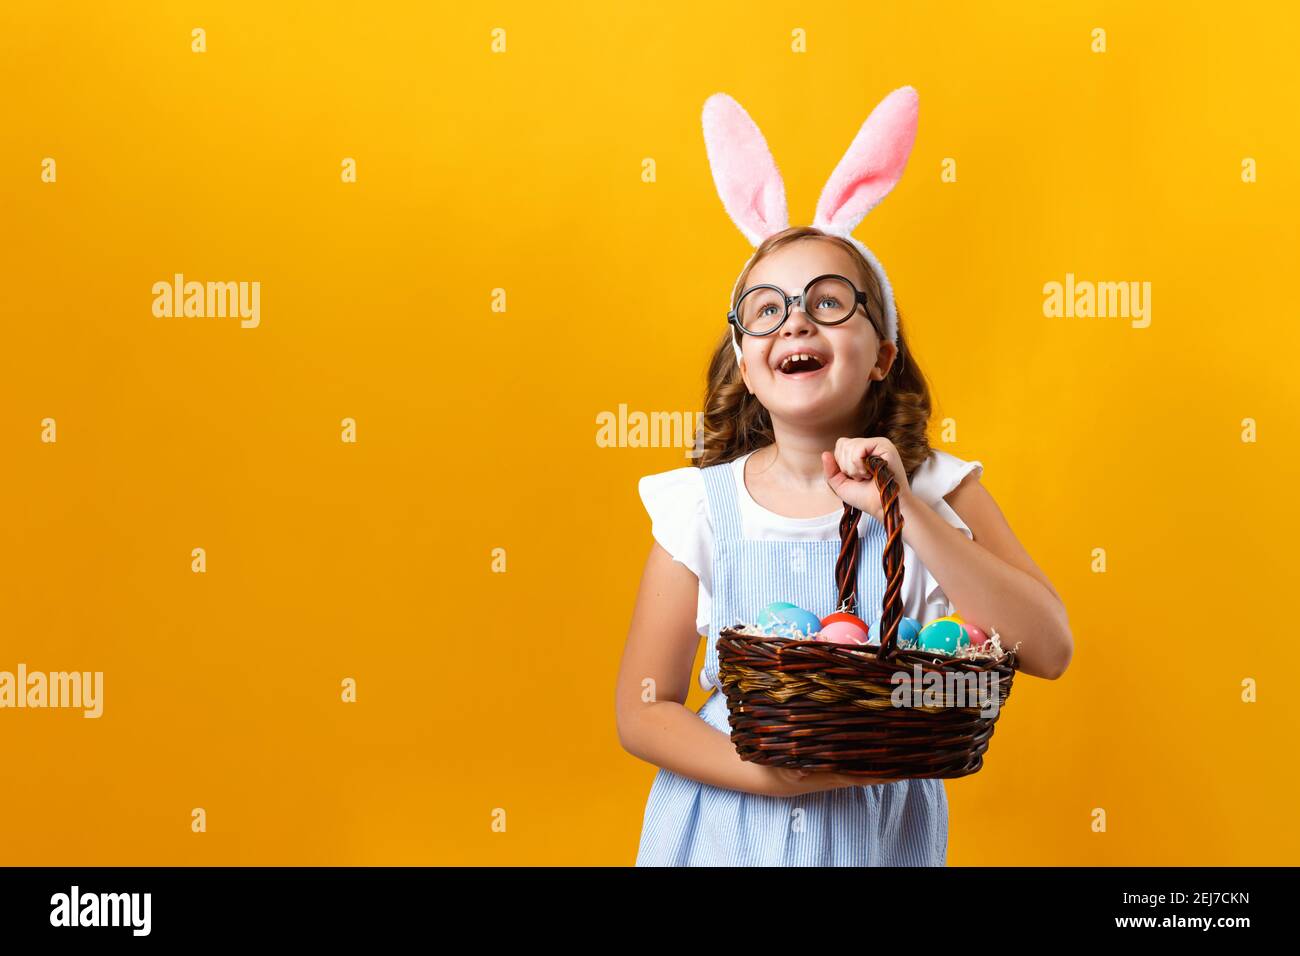 Cute little girl holding an Easter basket with eggs on a yellow background. Happy kid lifted his head and looks up. Copy space. Stock Photo